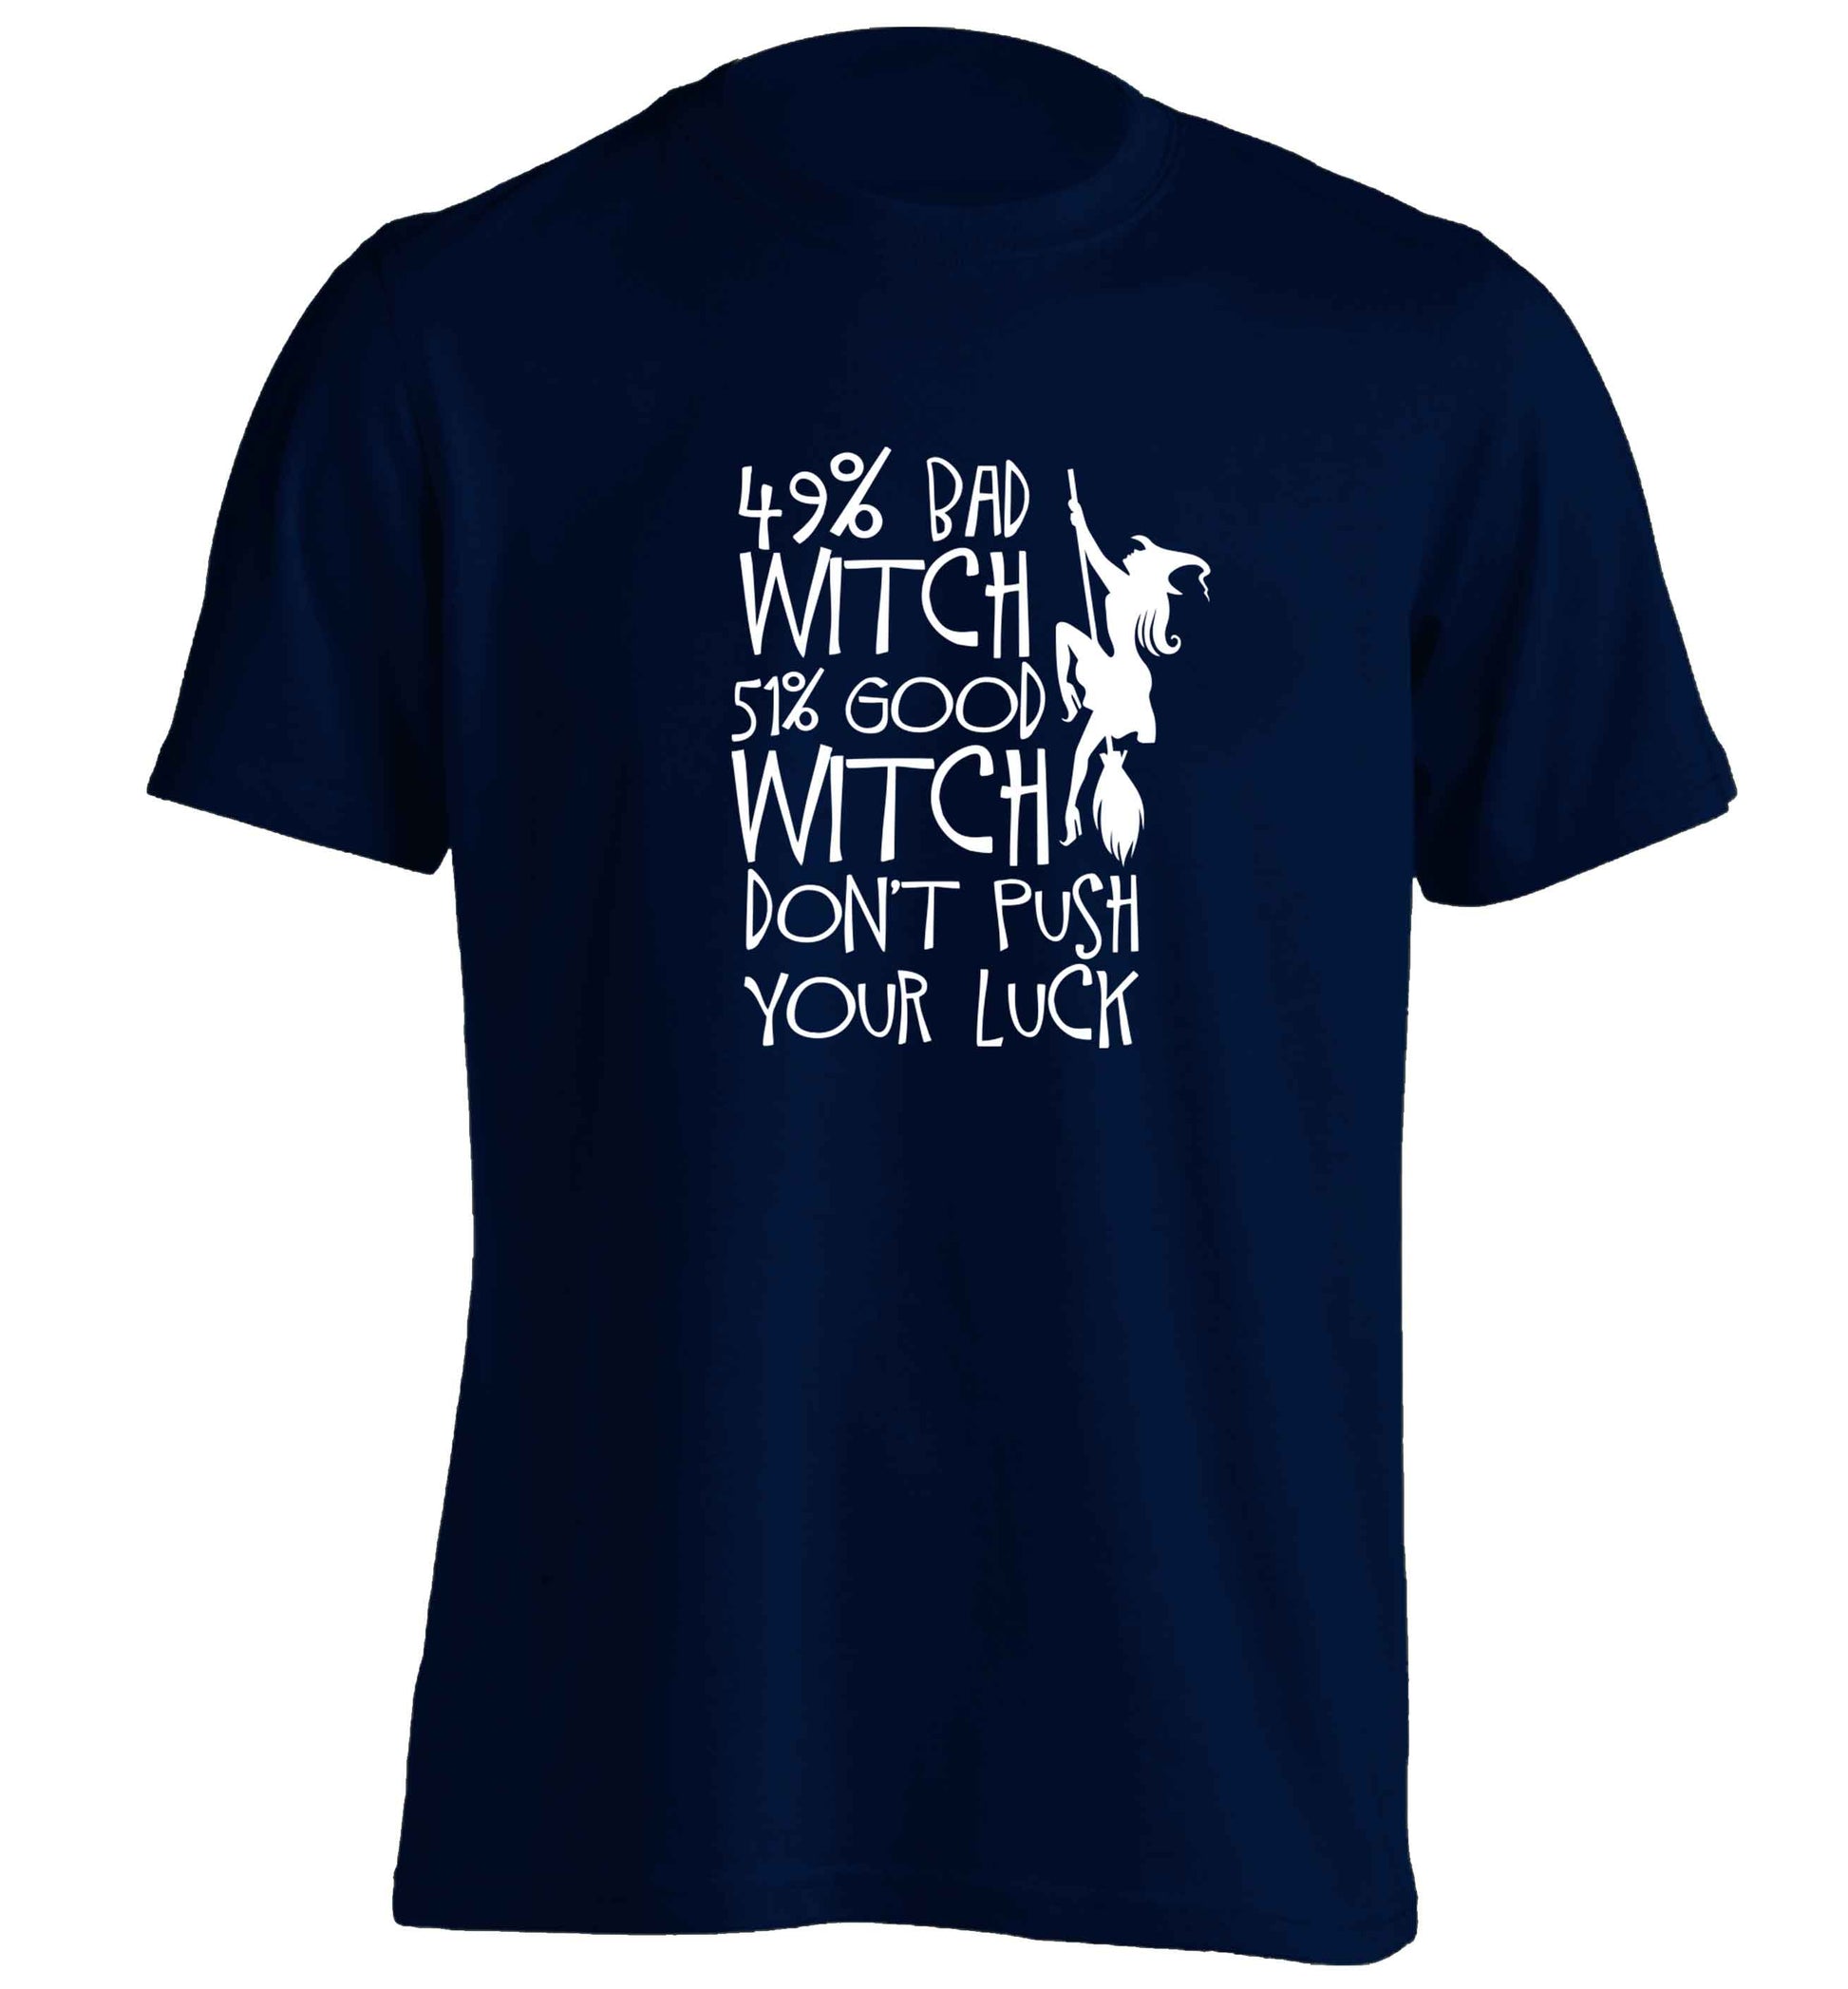 49% bad witch 51% good witch don't push your luck adults unisex navy Tshirt 2XL